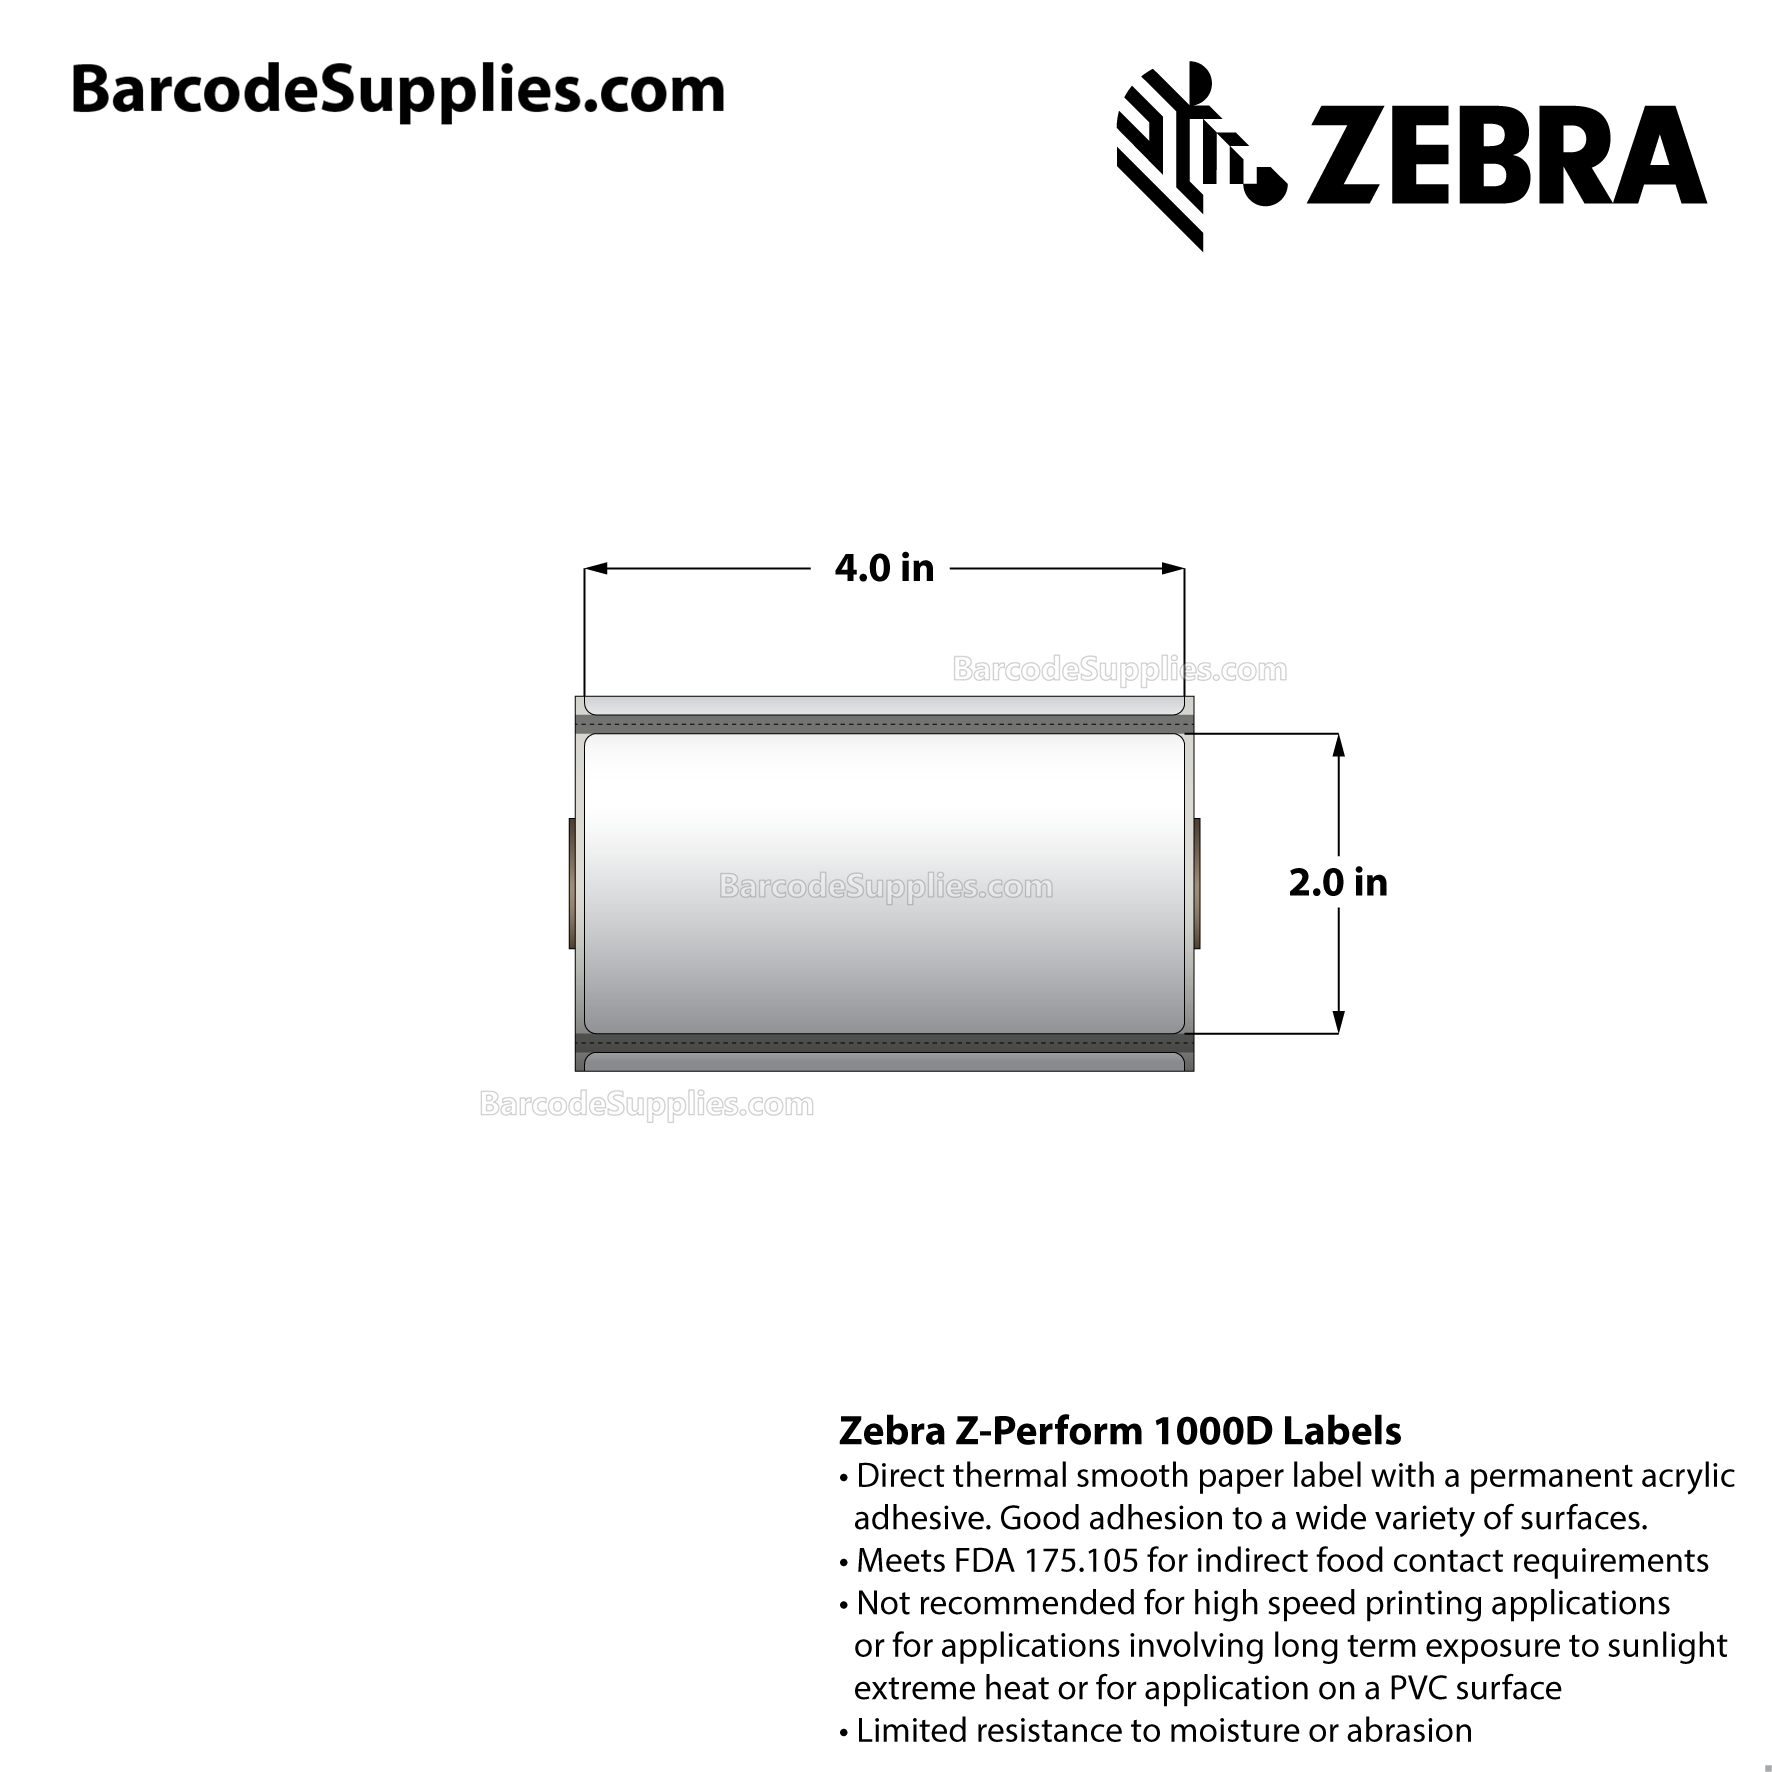 4 x 2 Direct Thermal White Z-Perform 1000D Labels With Permanent Adhesive - Black mark sensing - Perforated - 300 Labels Per Roll - Carton Of 36 Rolls - 10800 Labels Total - MPN: LD-R2AQ5J